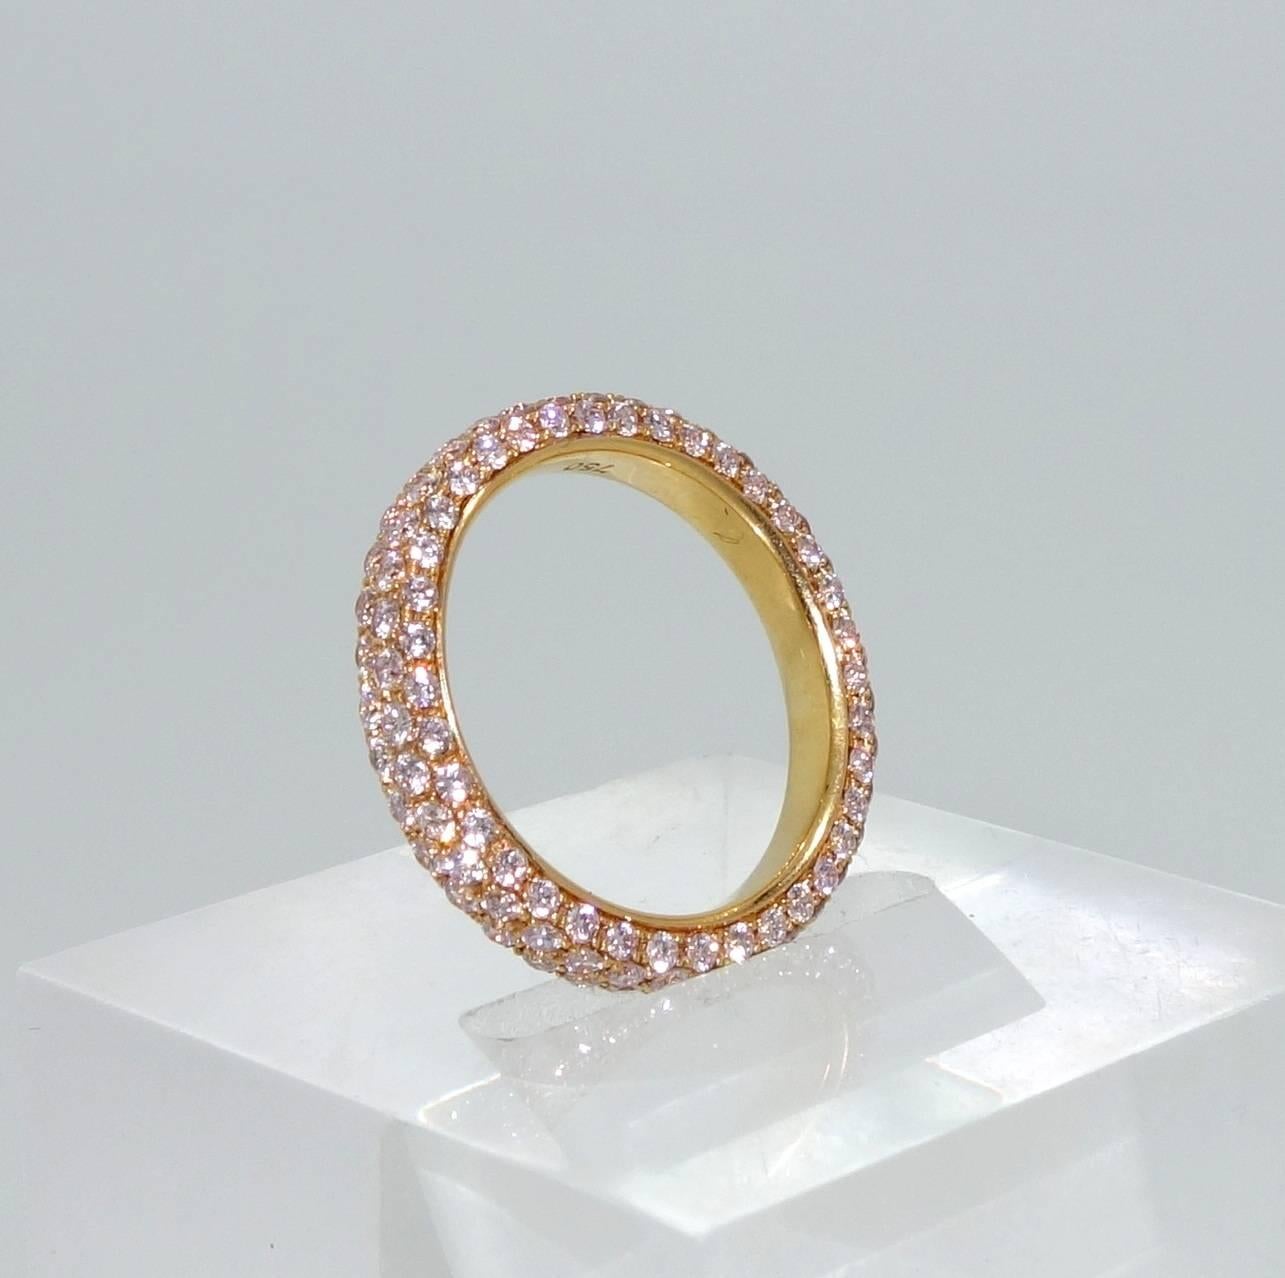 Well  match and finely cut light fancy natural pink diamonds are pave set in this pink gold band which is a size 6.5.  The four rows of light pink diamonds create a slight  domed paved surface of bright lively stones encircling the finger.  We will